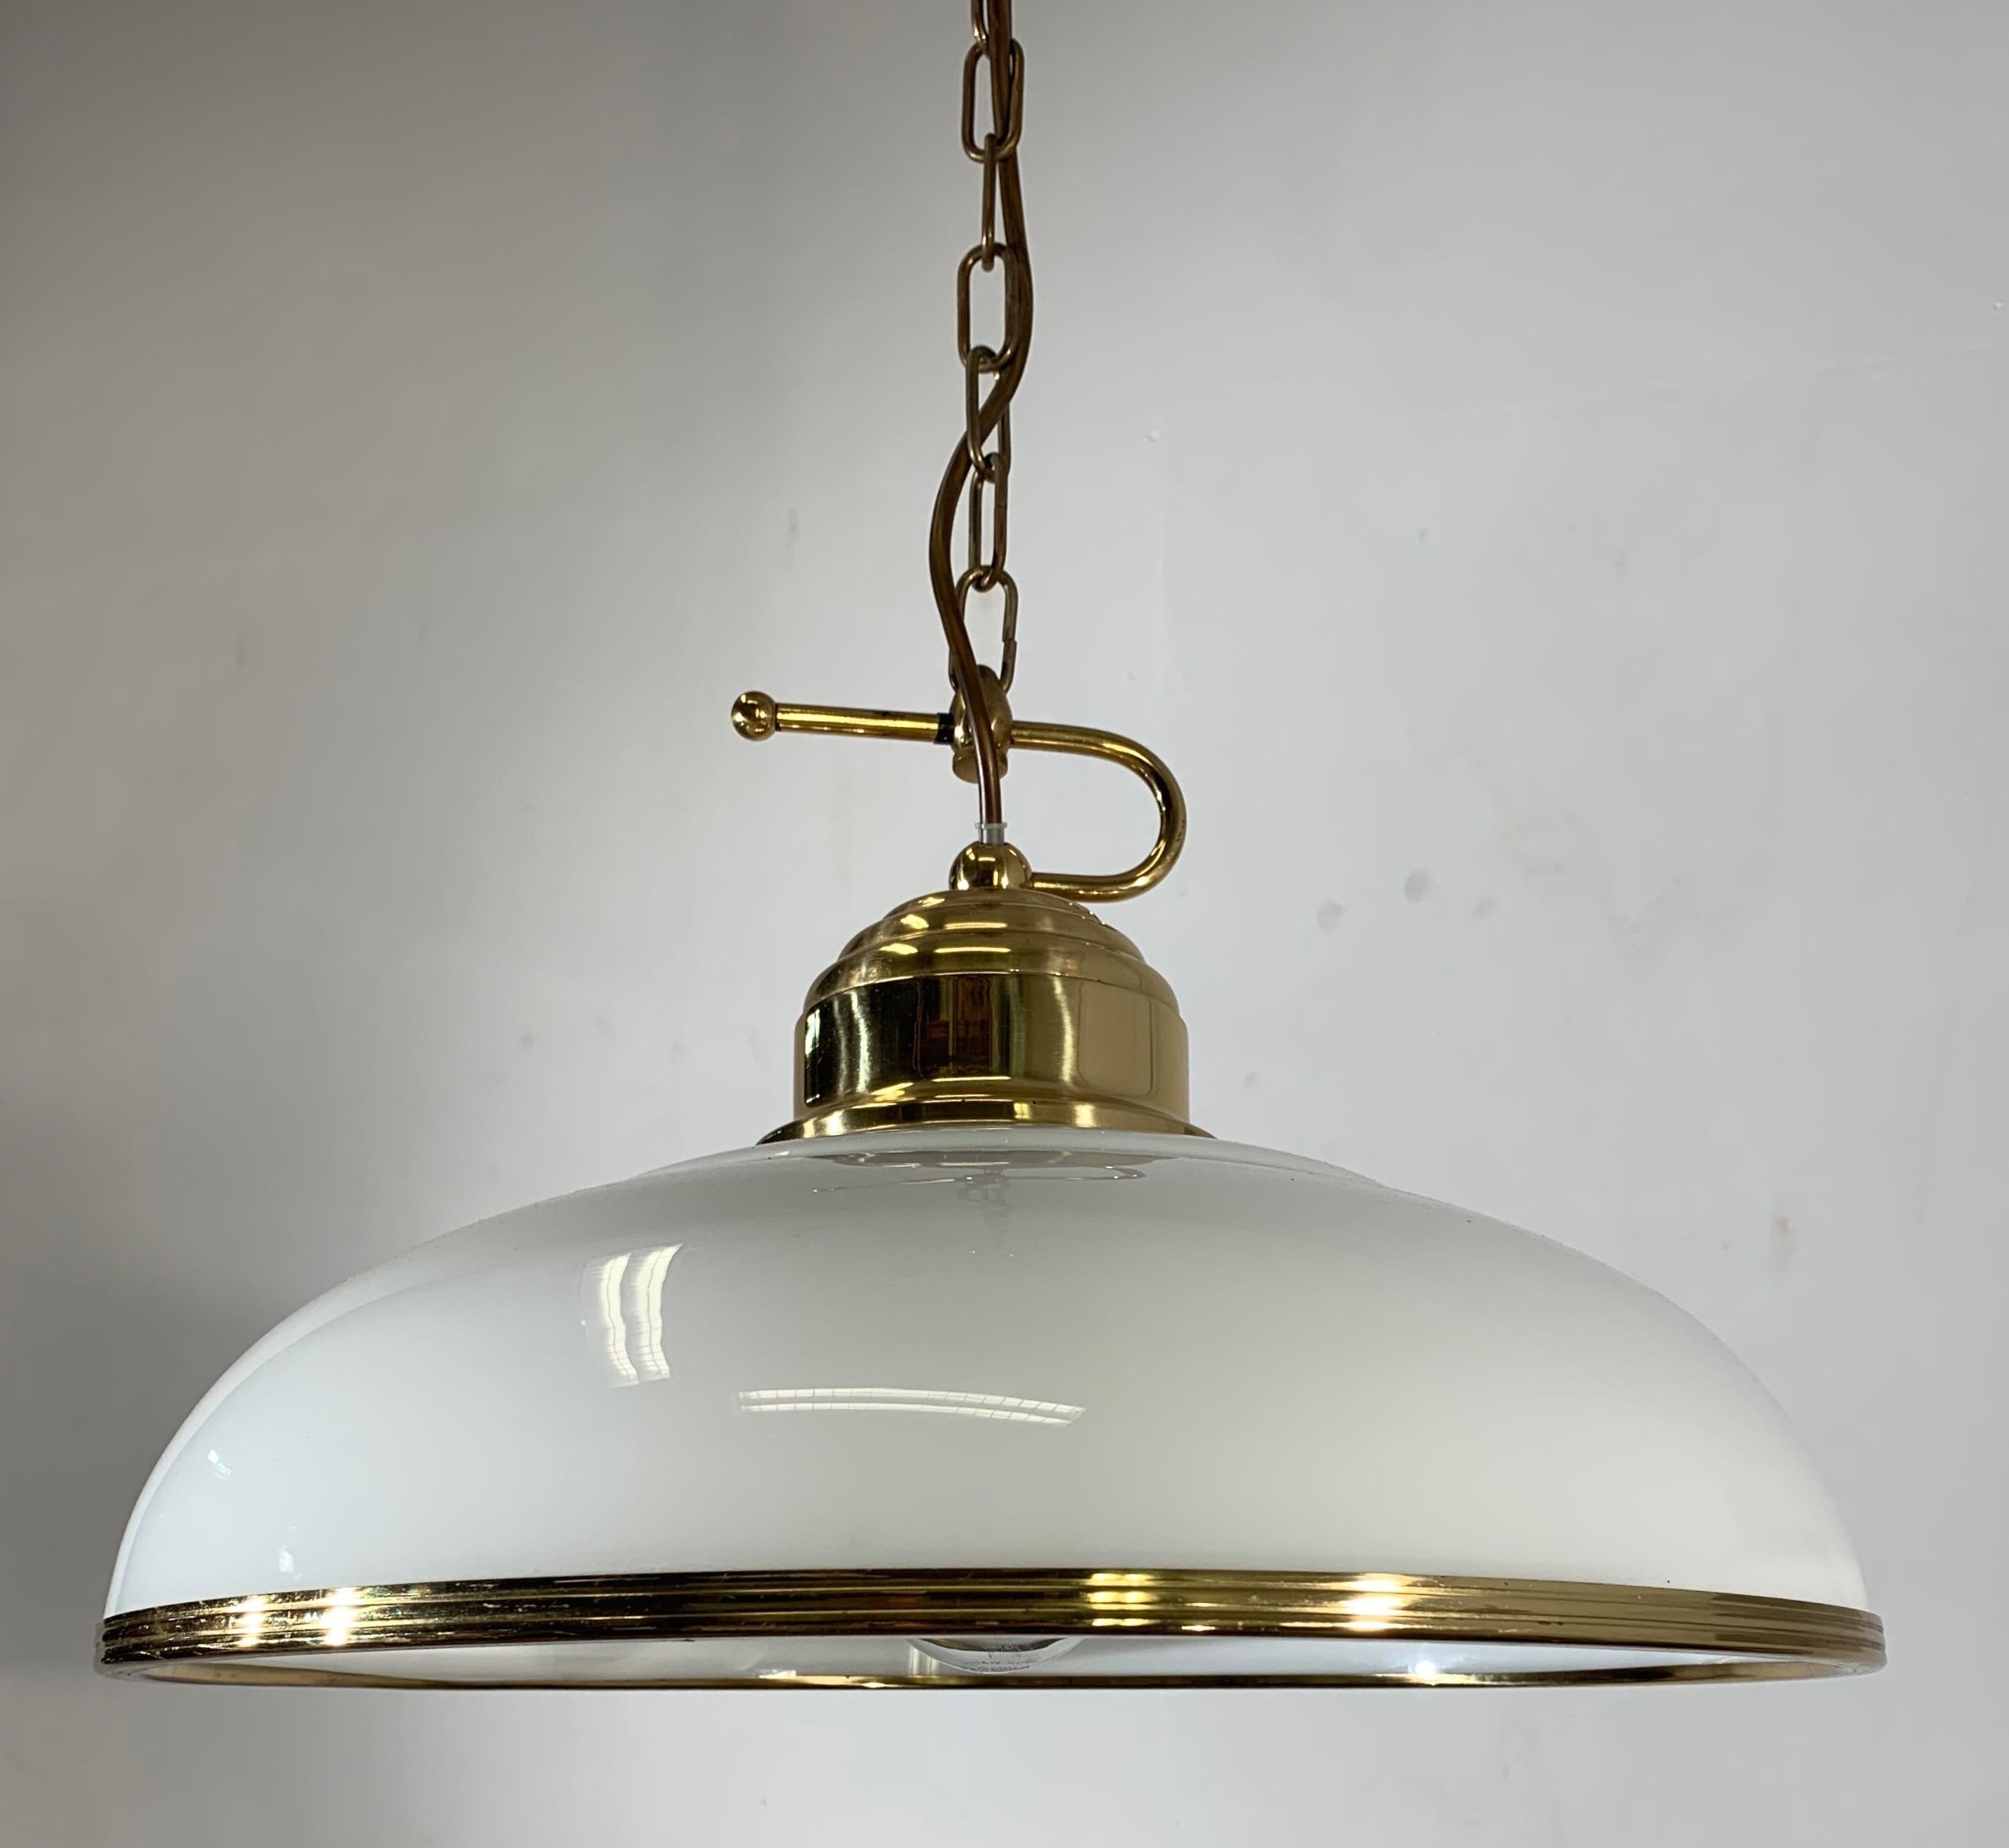 Good size, beautifully designed and excellent quality light fixture.

If you are looking for a midcentury light fixture then this beautiful brass pendant with its clear white opaline shade could be perfect for you. It comes with a solid brass chain